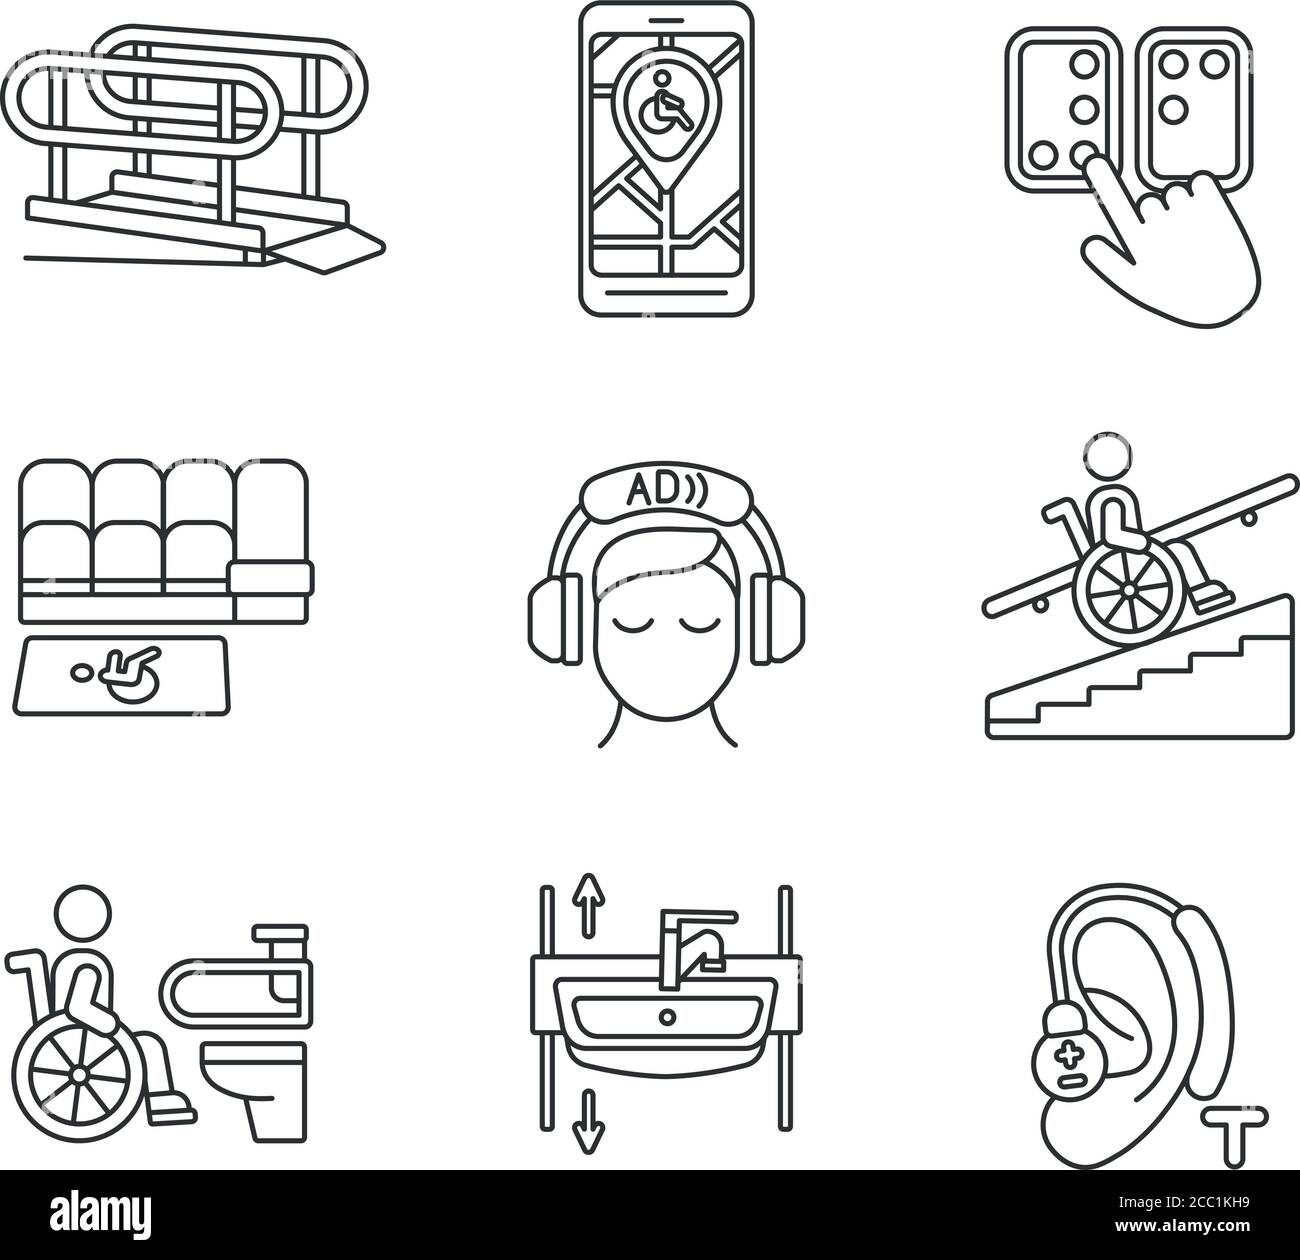 Facilities for people with disabilities linear icons set Stock Vector